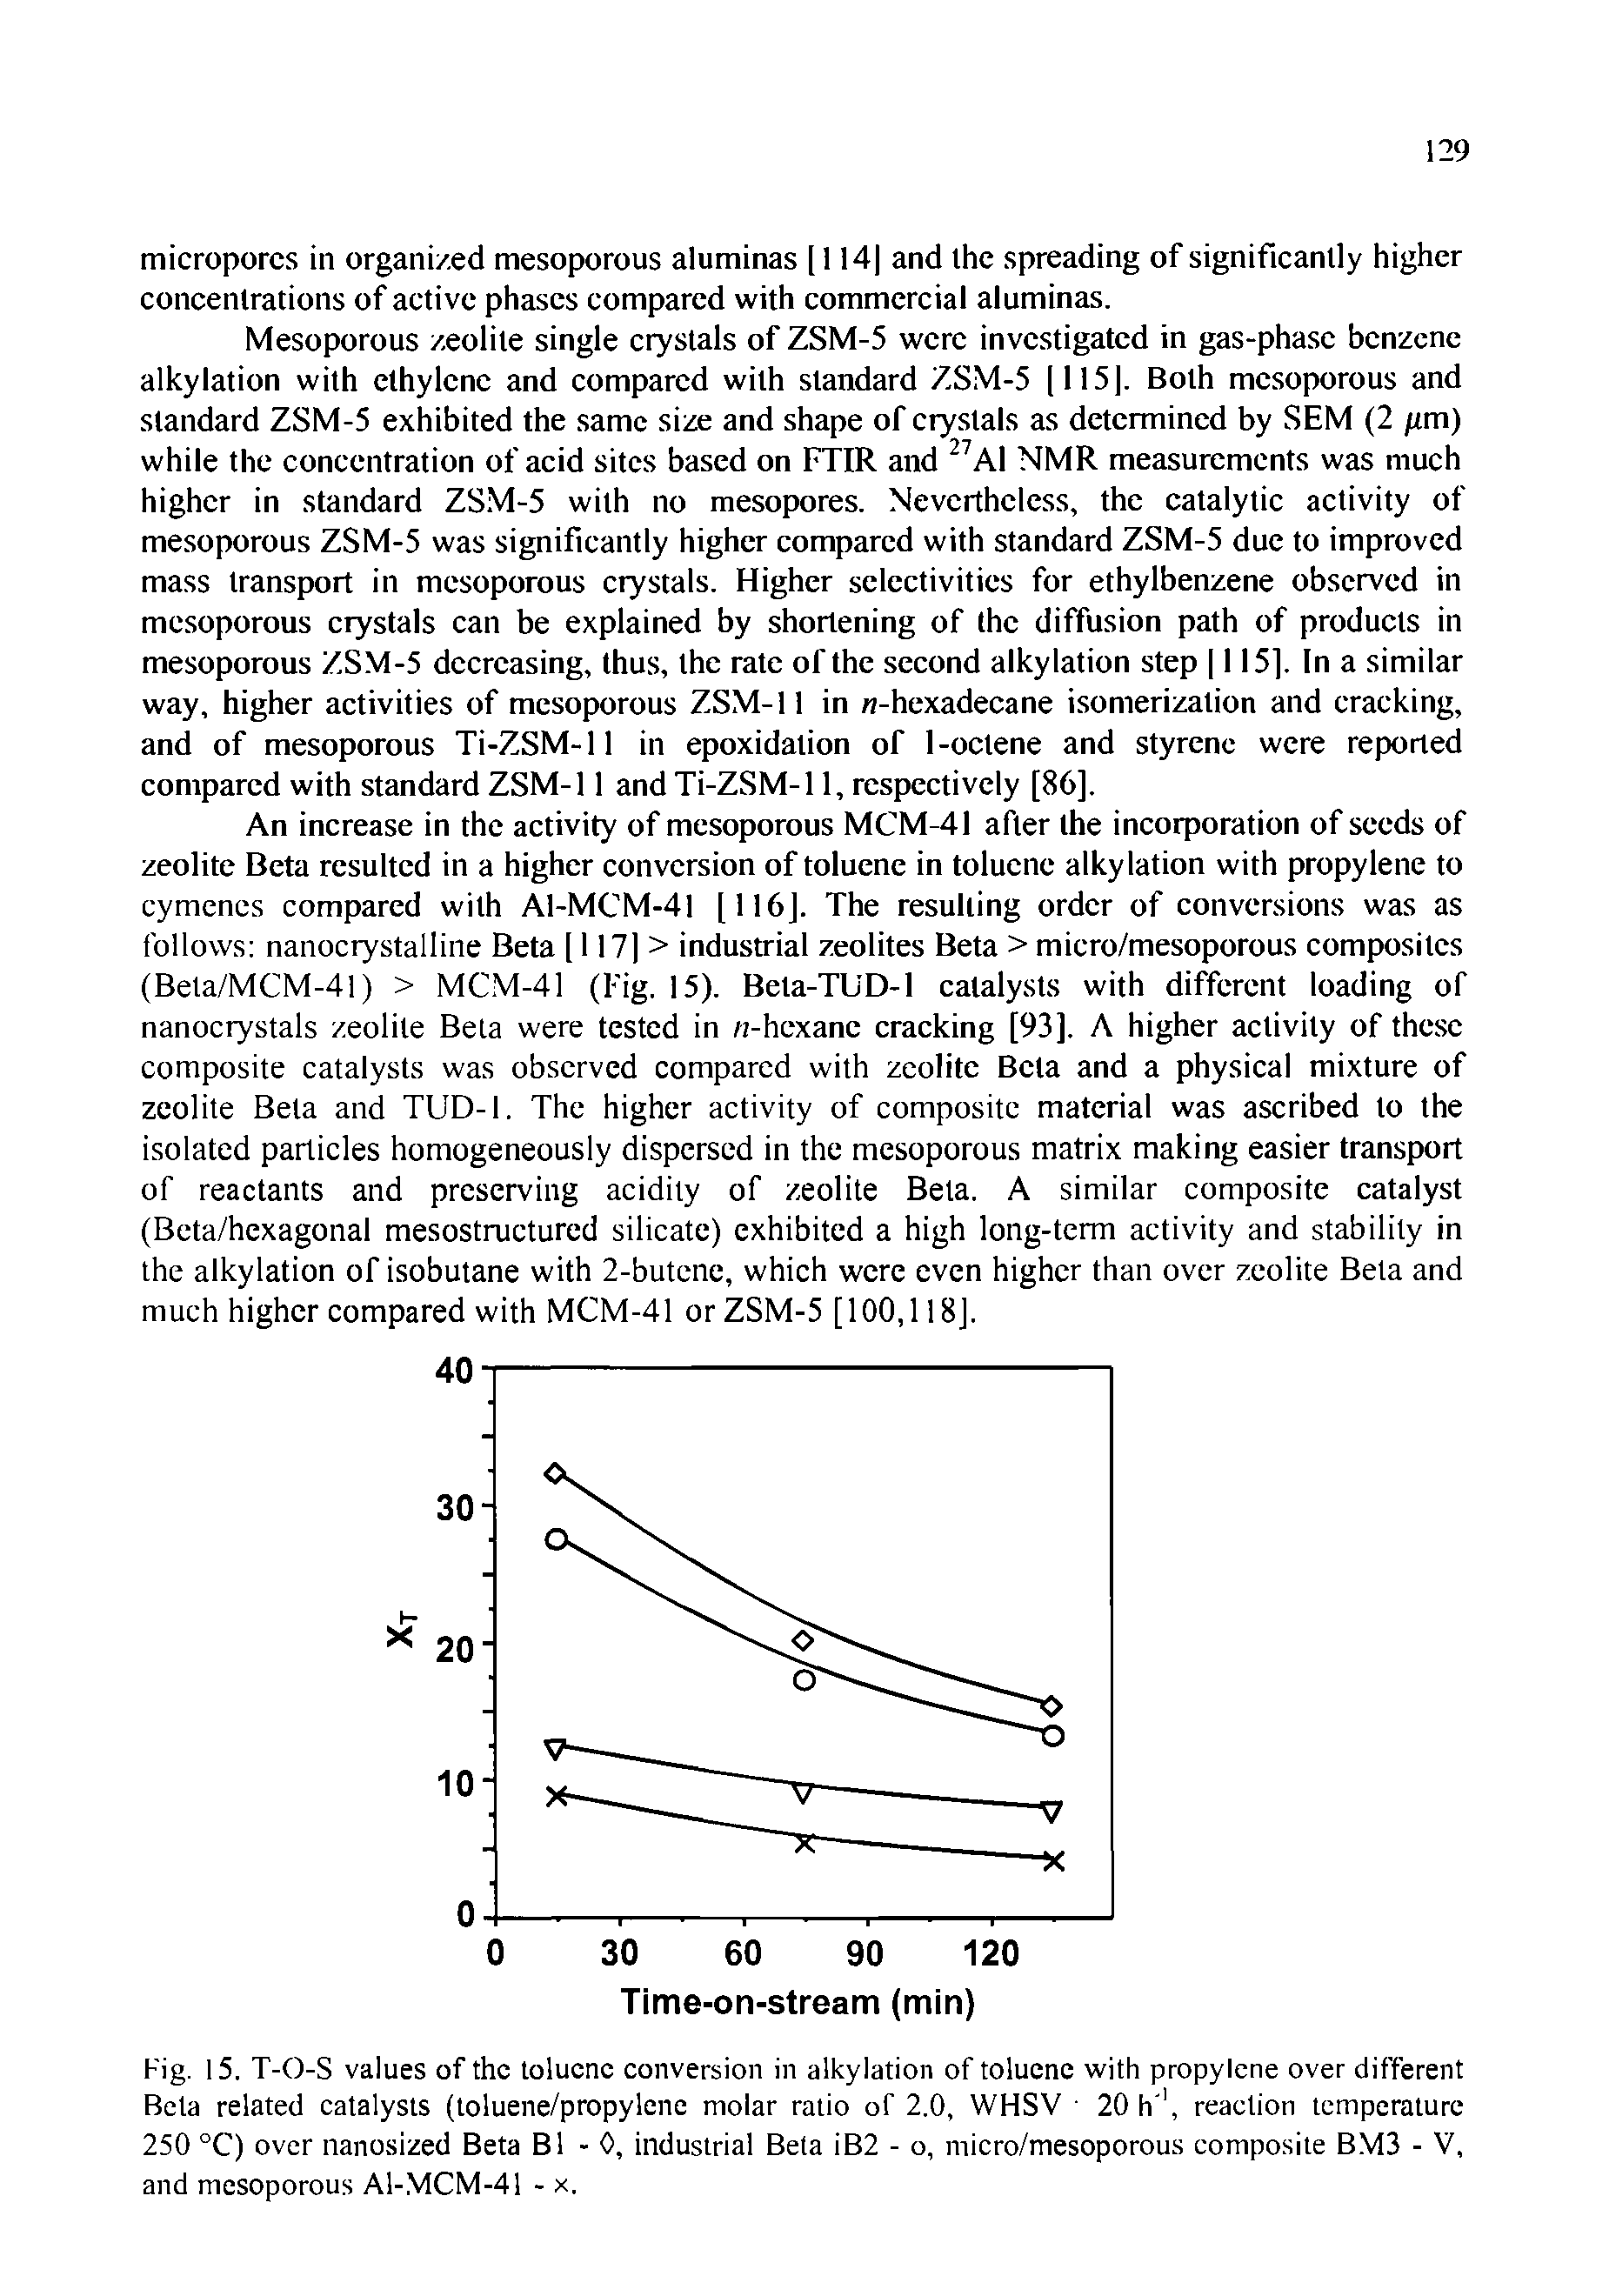 Fig. 15. T-O-S values of the toluene conversion in alkylation of toluene with propylene over different Beta related catalysts (toluene/propylene molar ratio of 2.0, WHSV 20 h 1, reaction temperature 250 °C) over nanosized Beta B1 - 0, industrial Bela iB2 - o, micro/mesoporous composite BM3 - V, and mesoporous Al-MCM-41 - x.